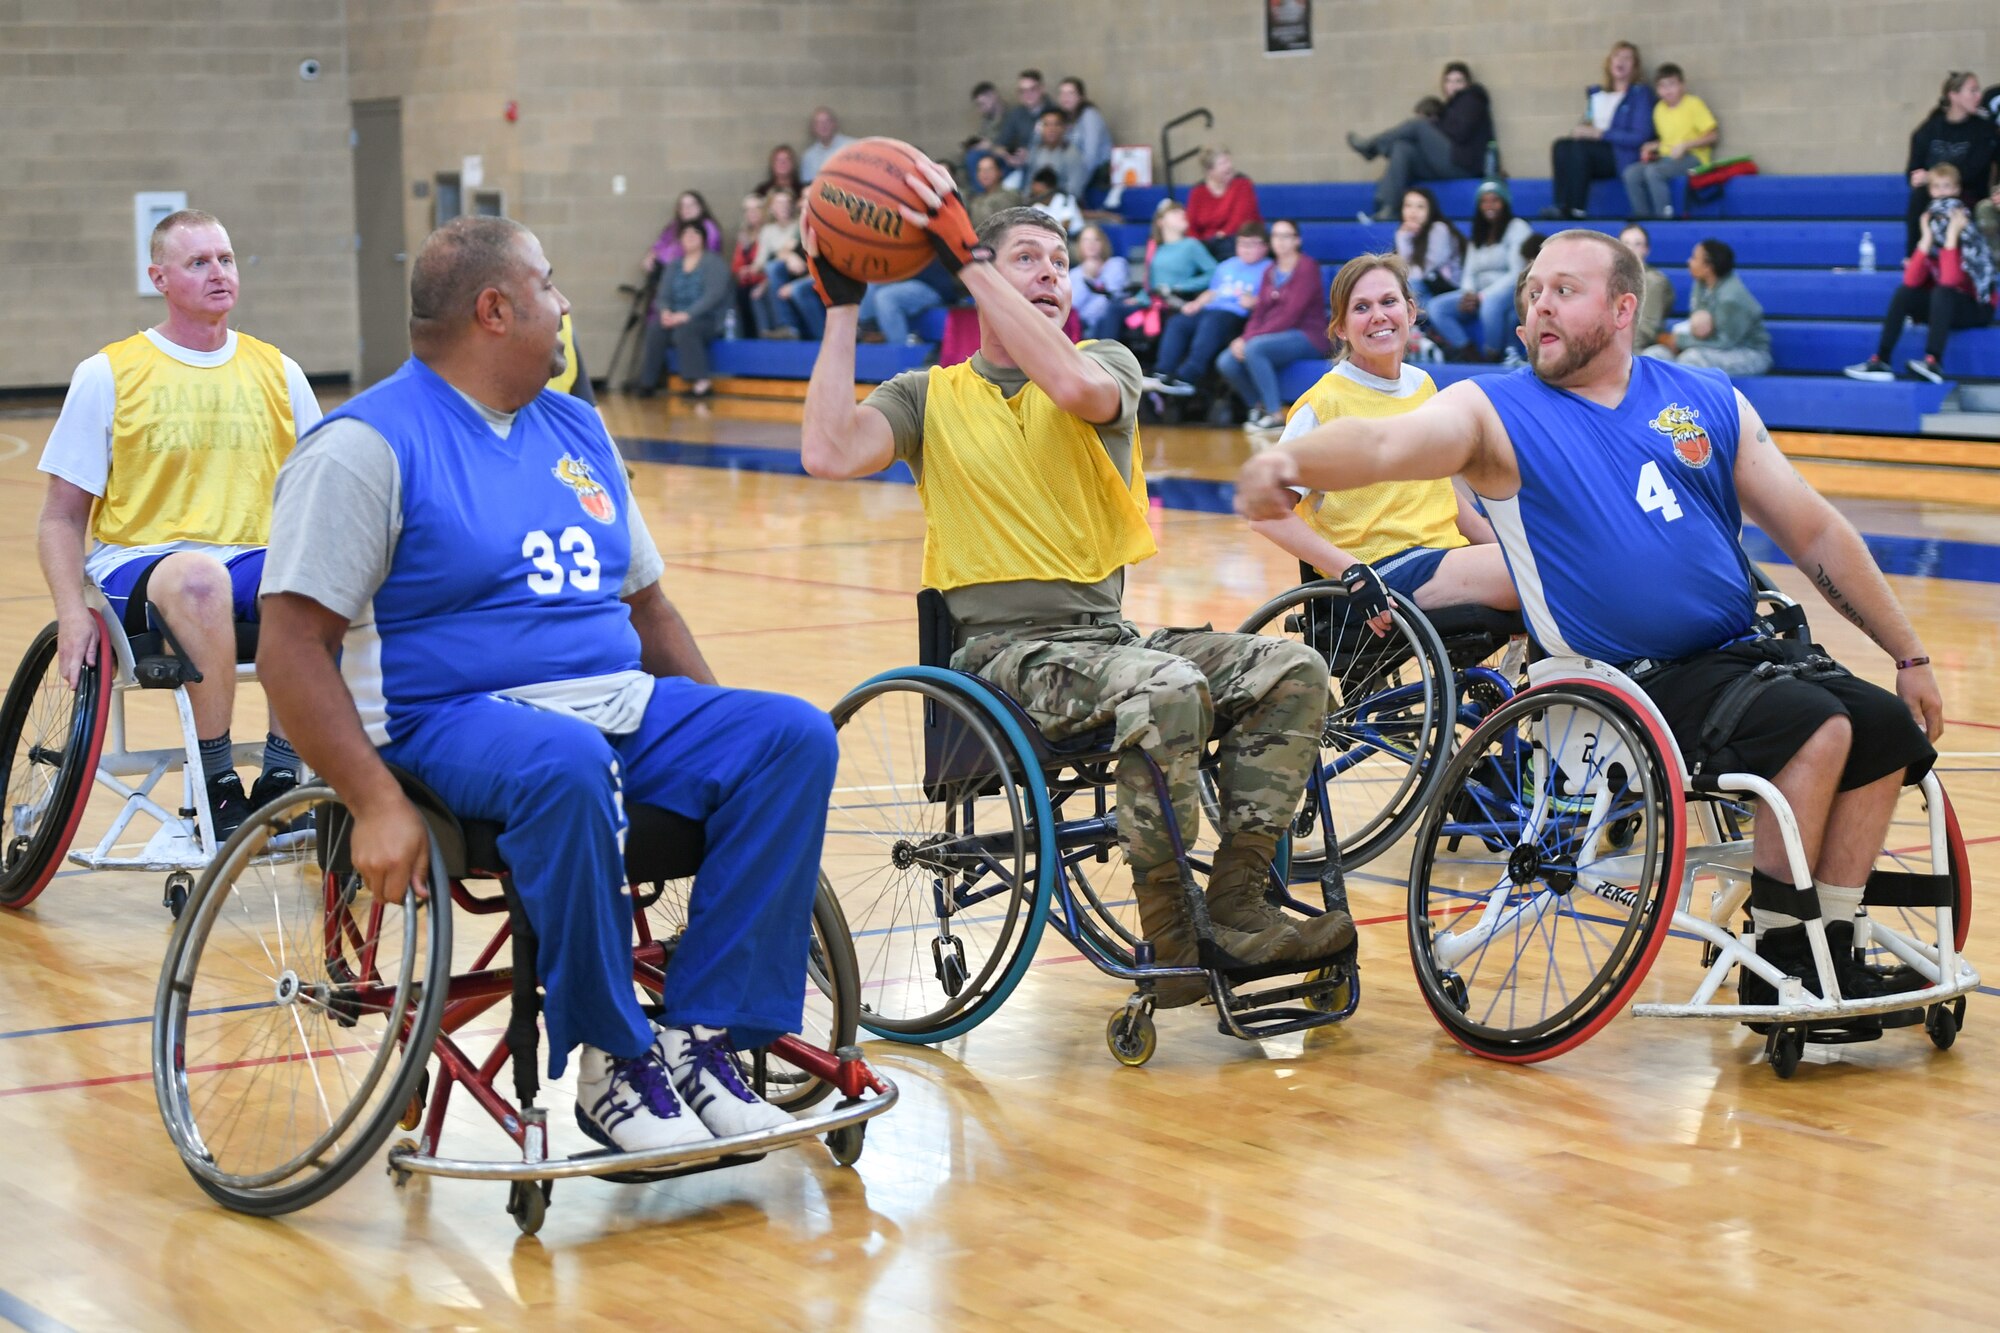 Major Michael Twining, 75th Security Forces Squadron commander, shoots the ball during a wheelchair basketball game Oct. 9, 2019 at Hill Air Force Base, Utah. Leaders from Hill's units faced off against the Ogden Wheelin' Wildcats, a semi-professional wheelchair basketball team, to celebrate National Disability Employment Awareness Month. (U.S. Air Force photo by Cynthia Griggs)